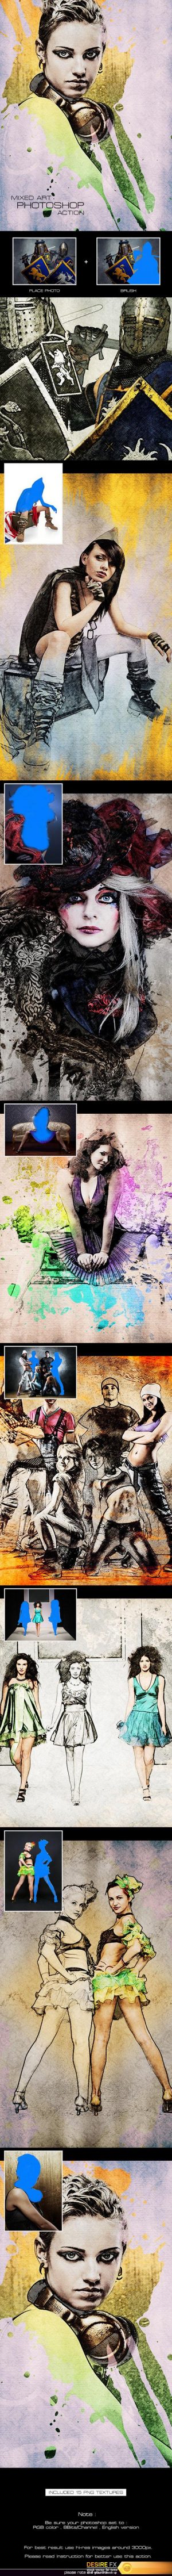 GraphicRiver – Mixed Art – Photoshop Action 12000444